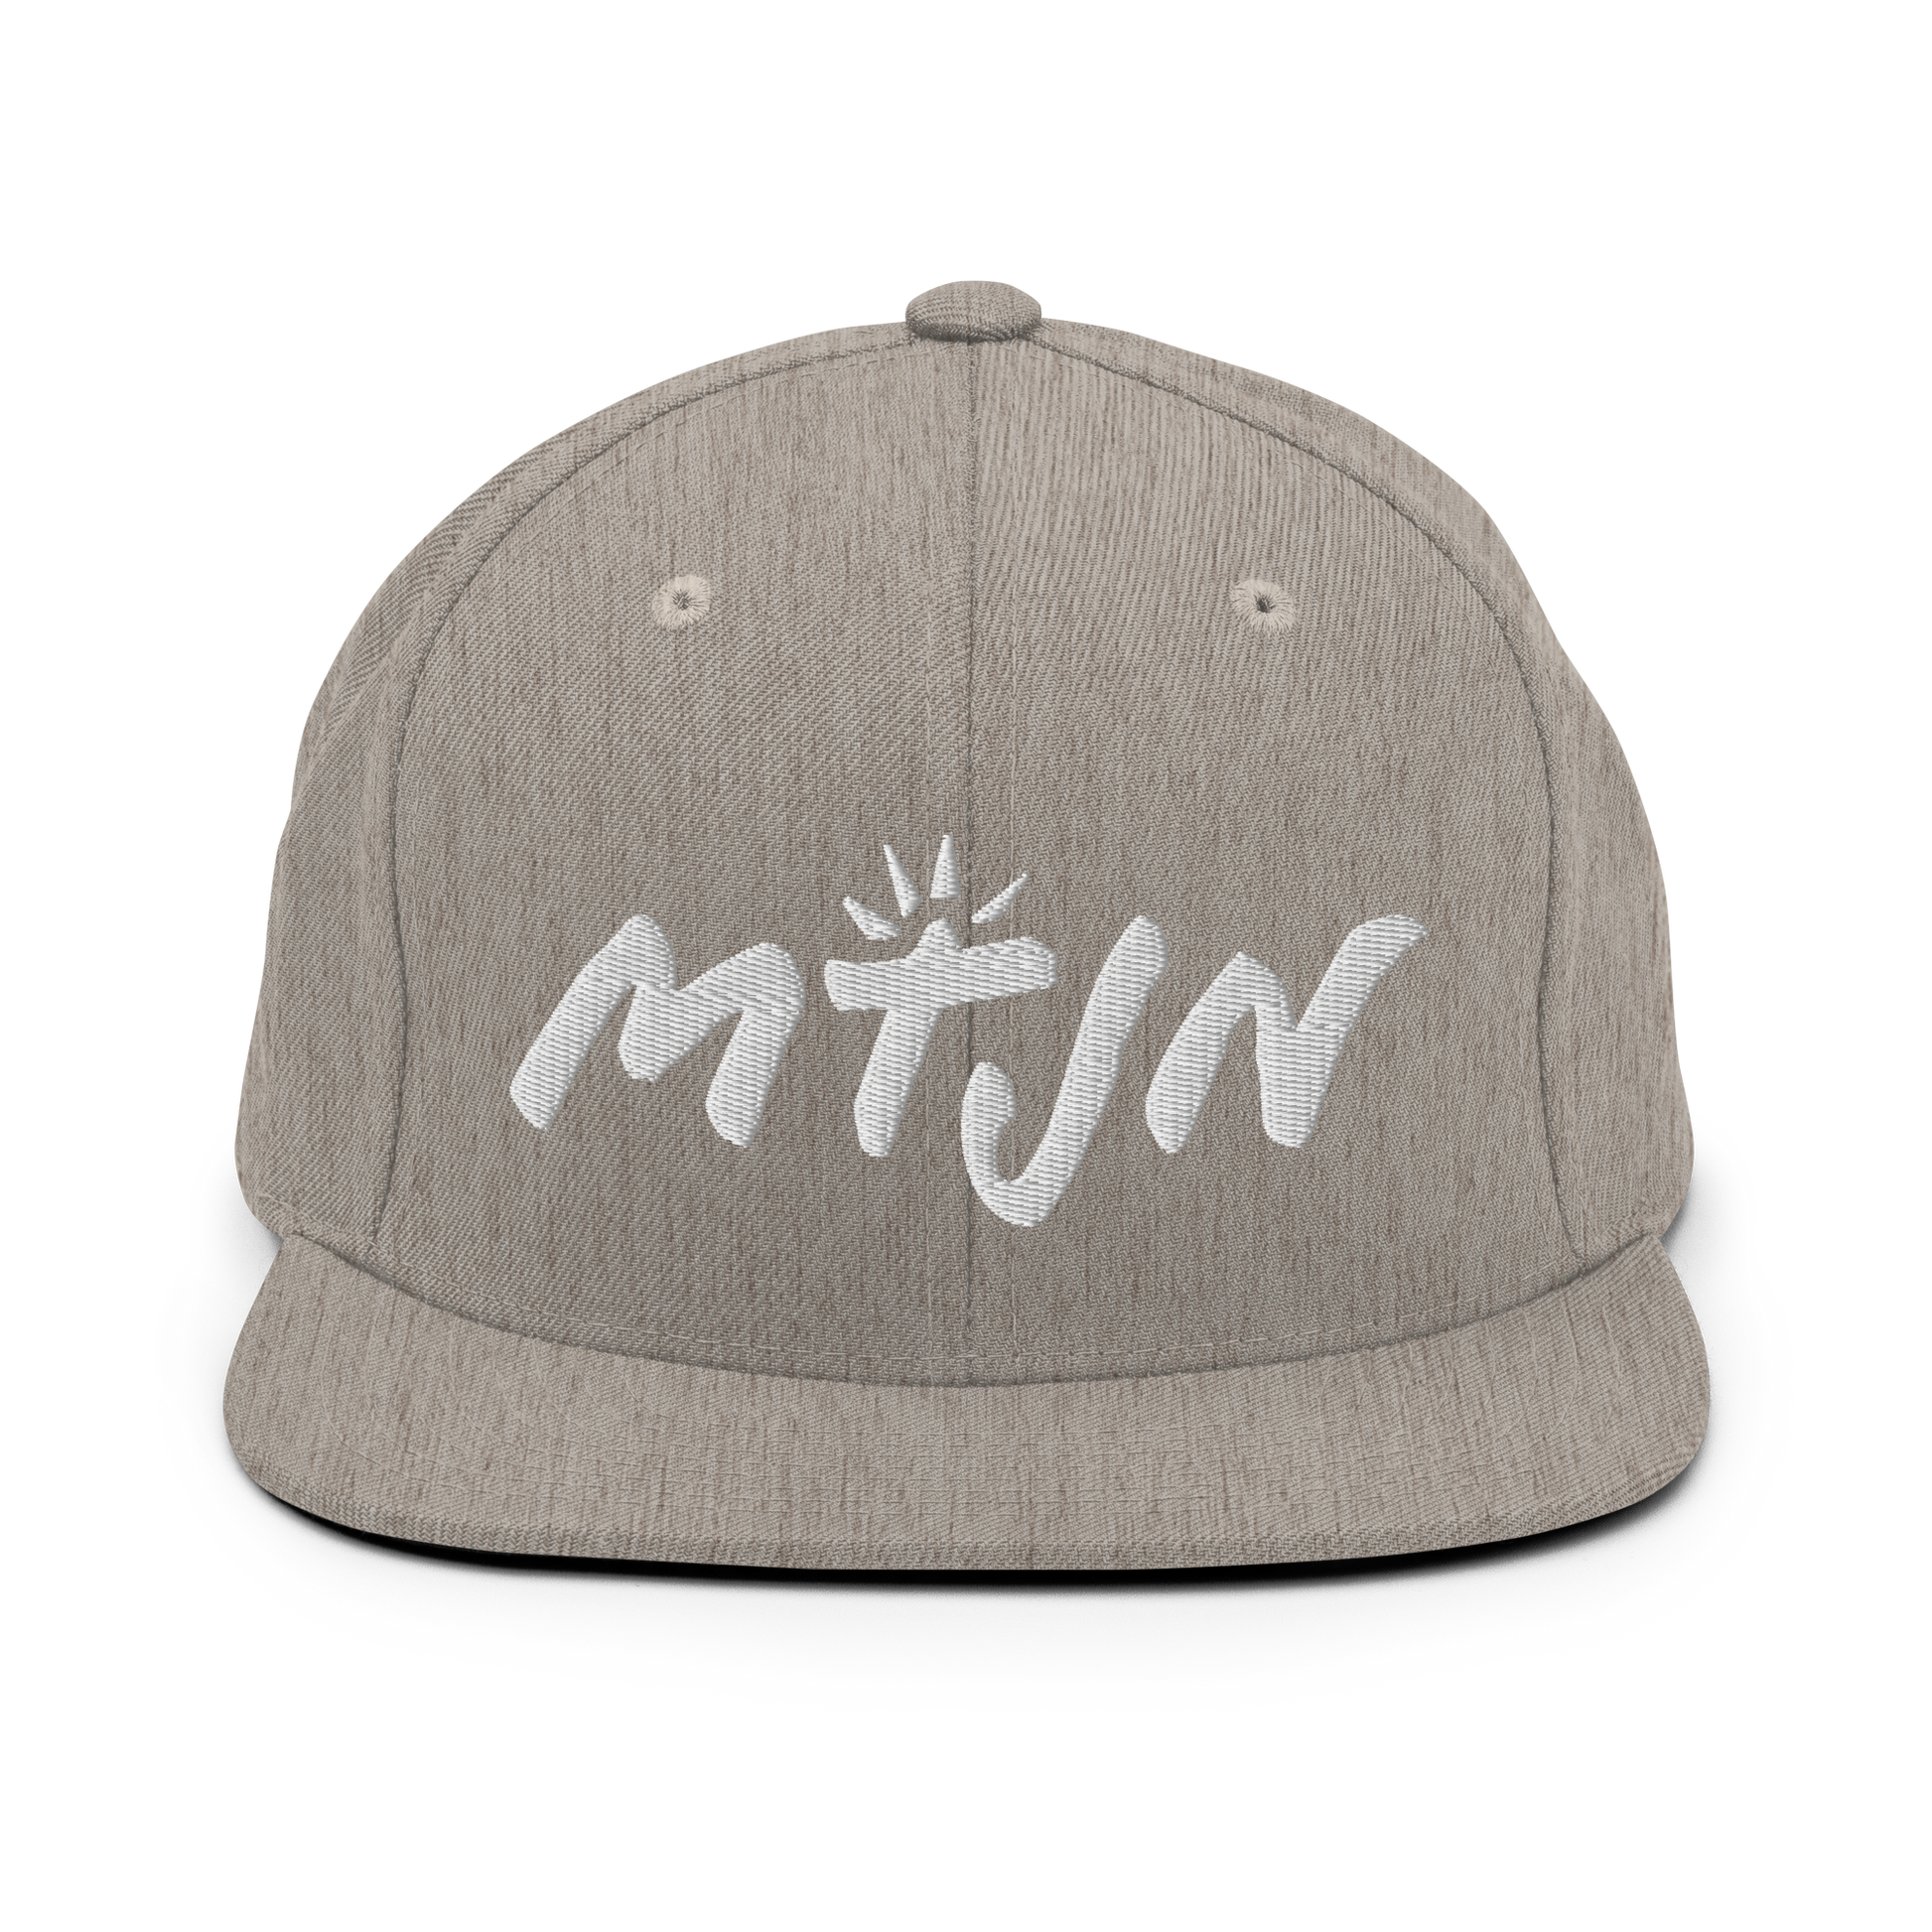 MTJN SNAPBACK - The General Booty Official Shop by More Than Just A Name | MTJN